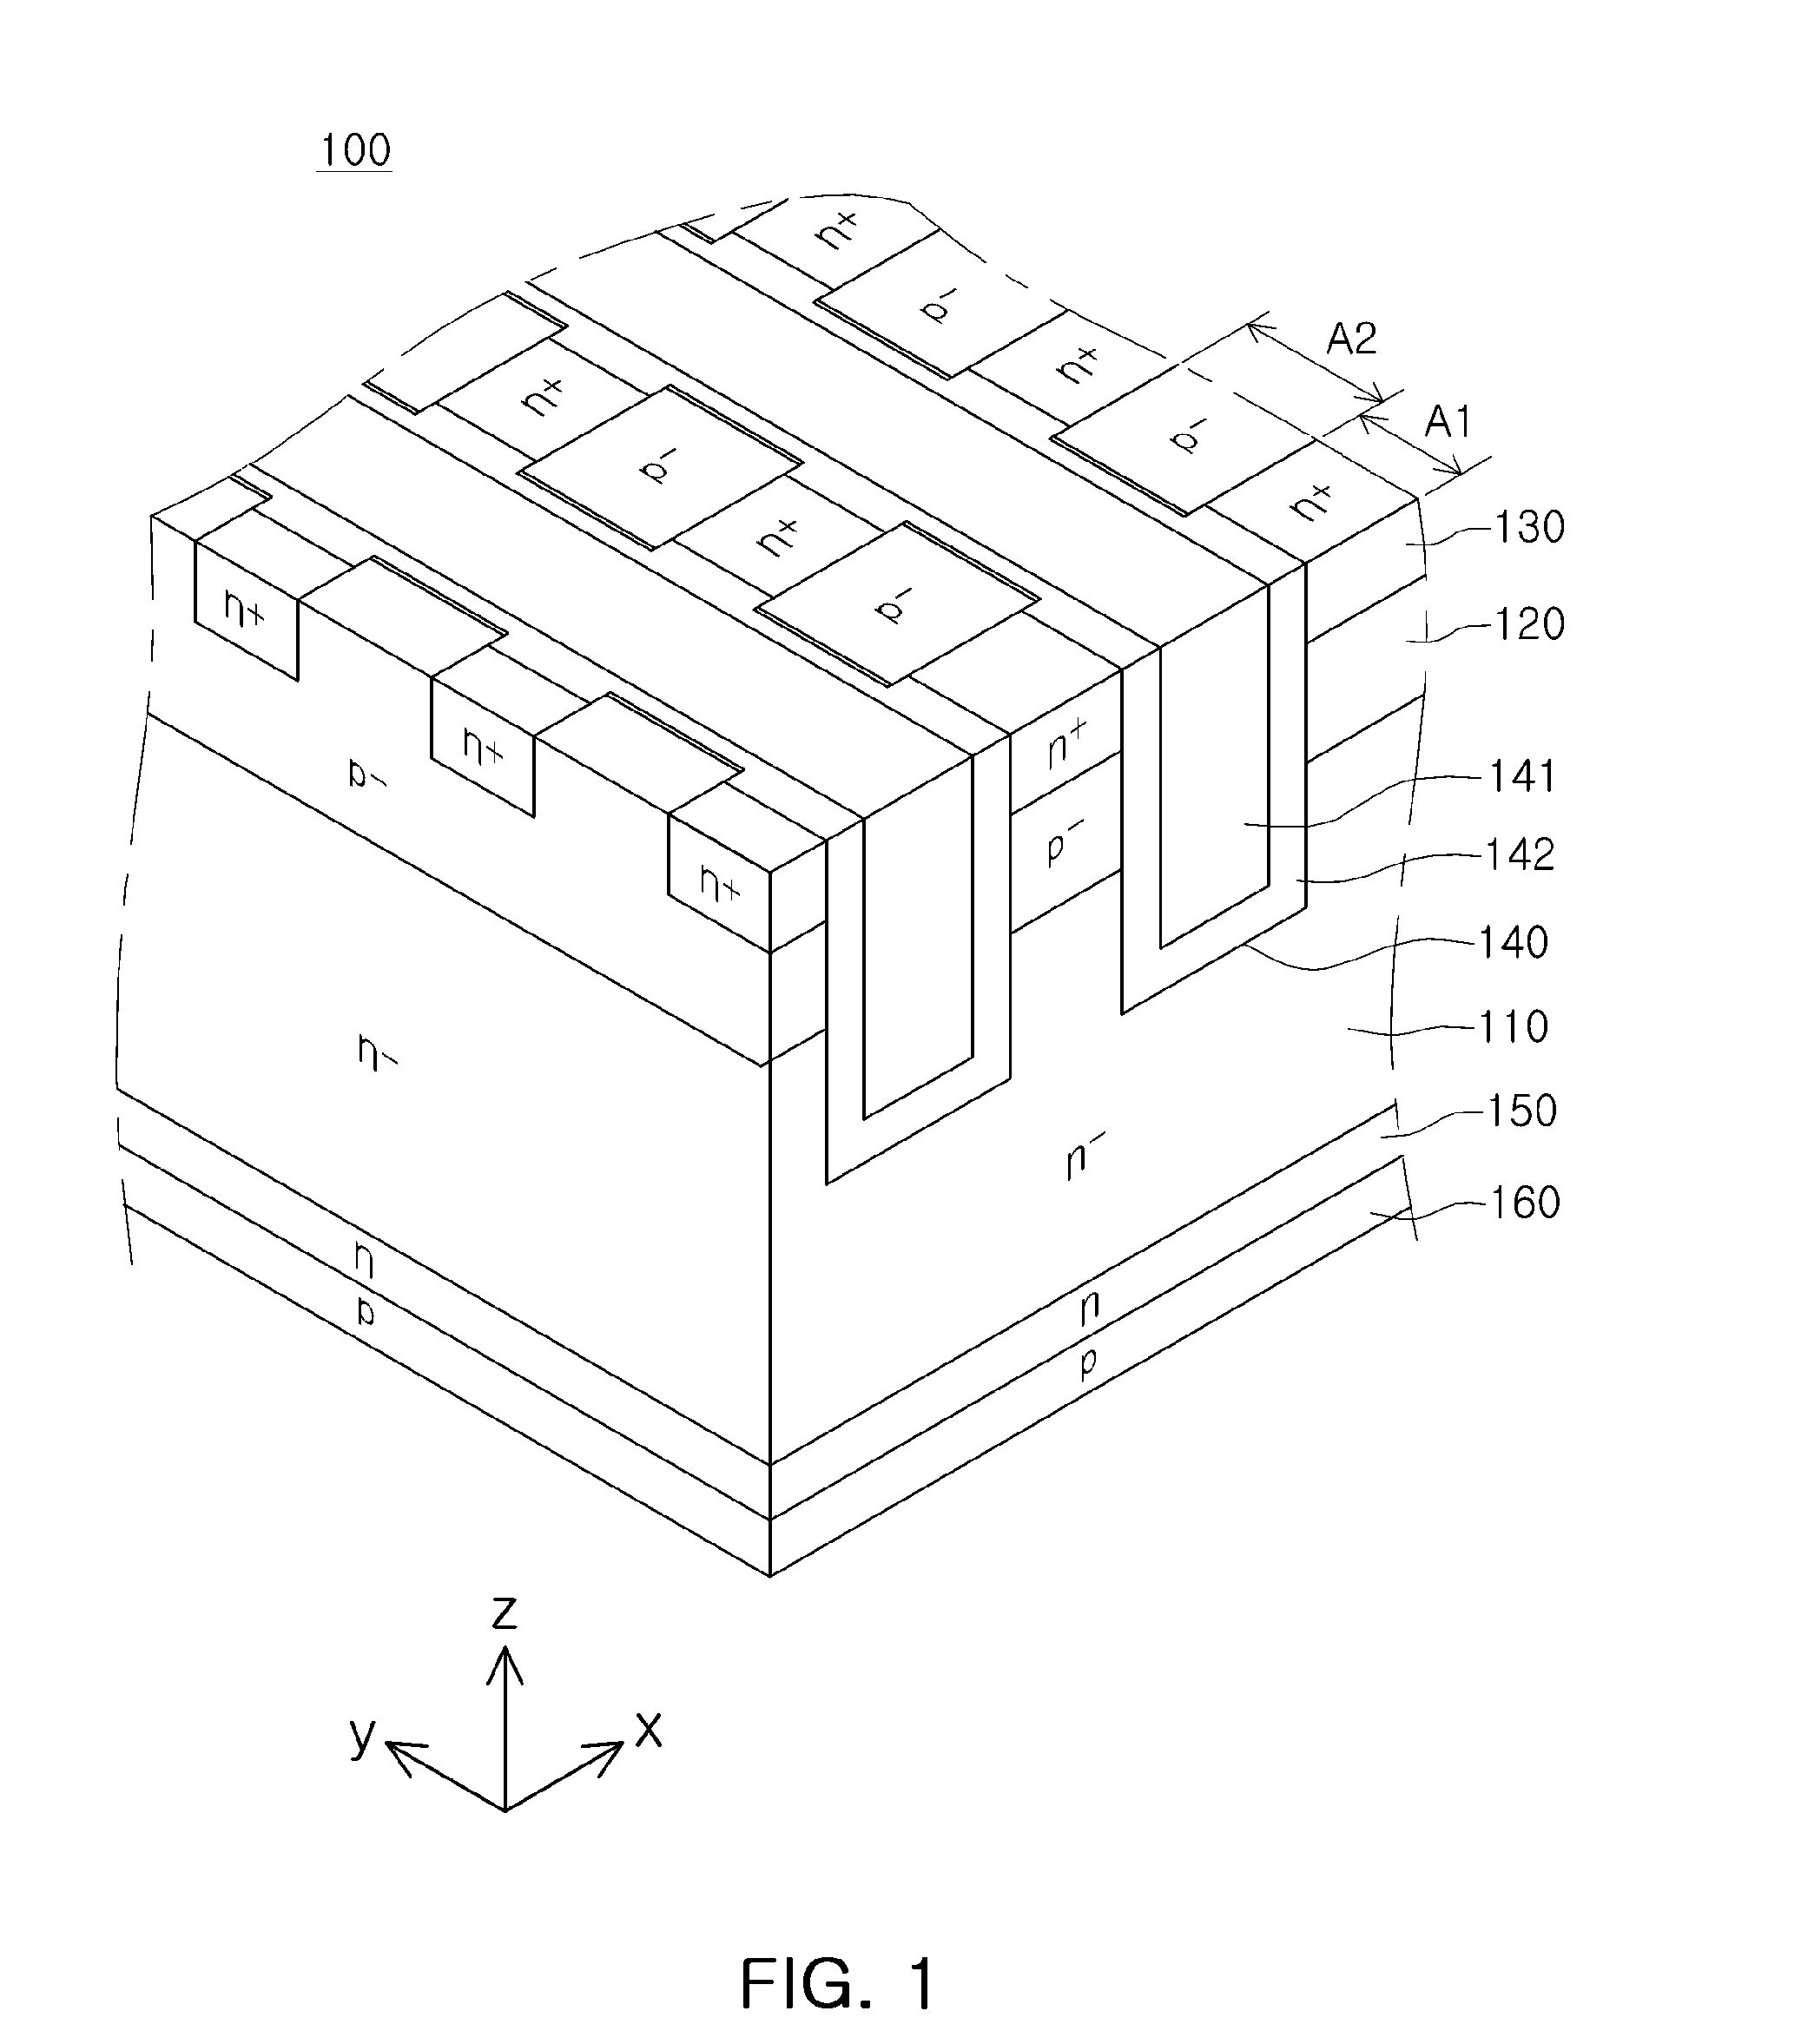 Power semiconductor device and method of fabricating the same